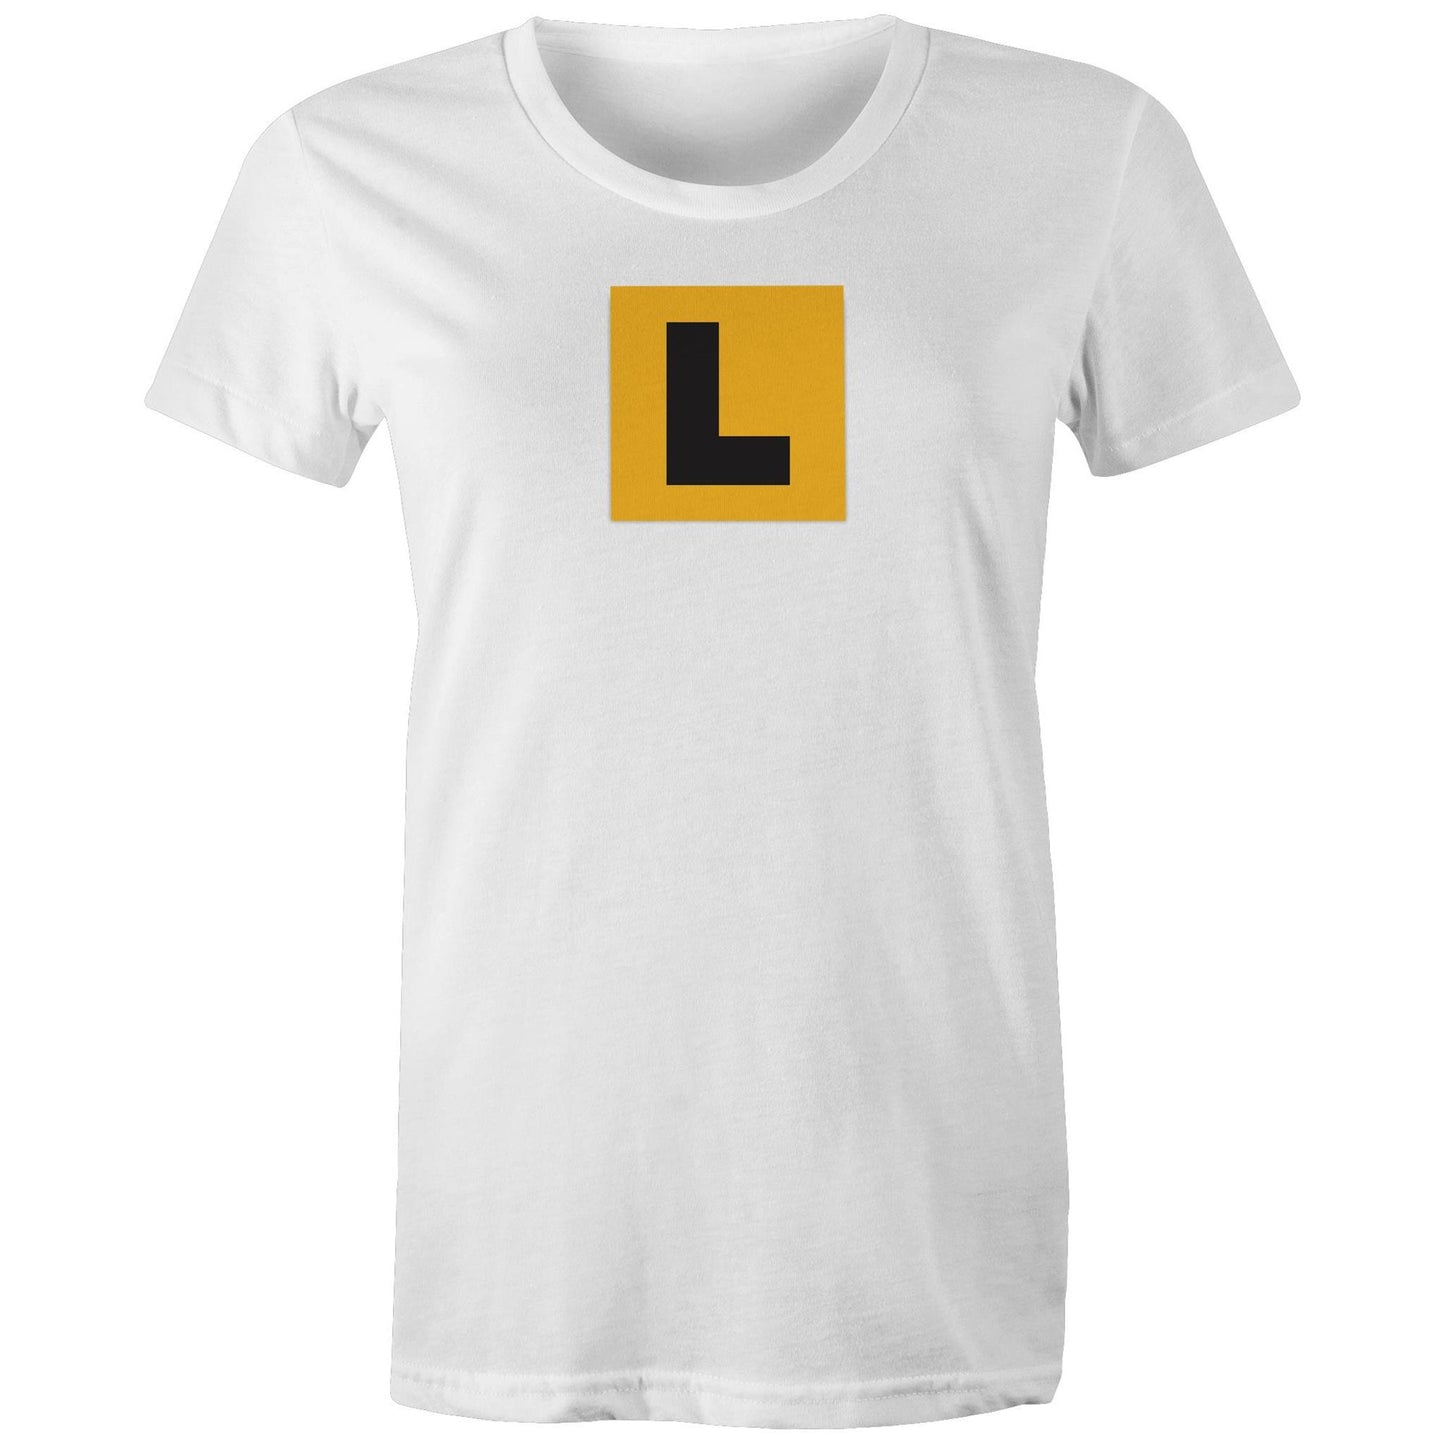 L Plate T Shirts for Women